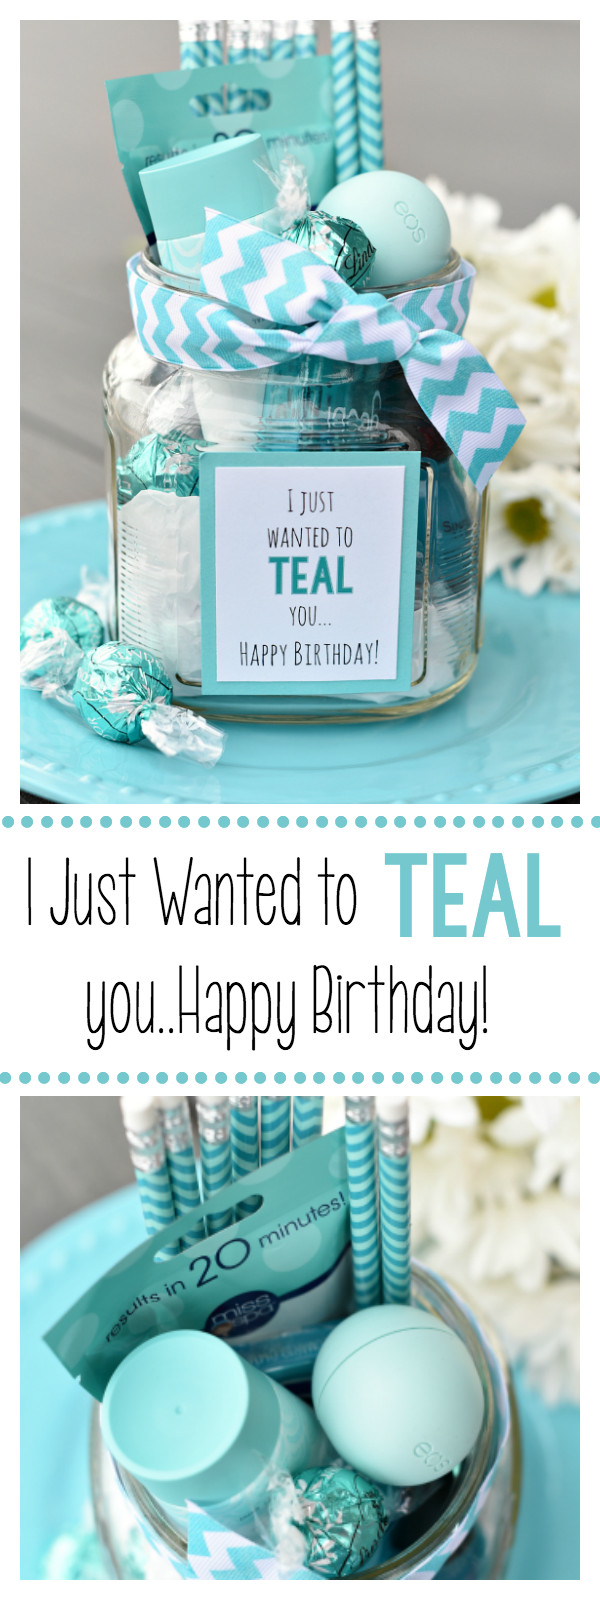 Happy Birthday Gift Ideas
 Teal Birthday Gift Idea for Friends – Fun Squared